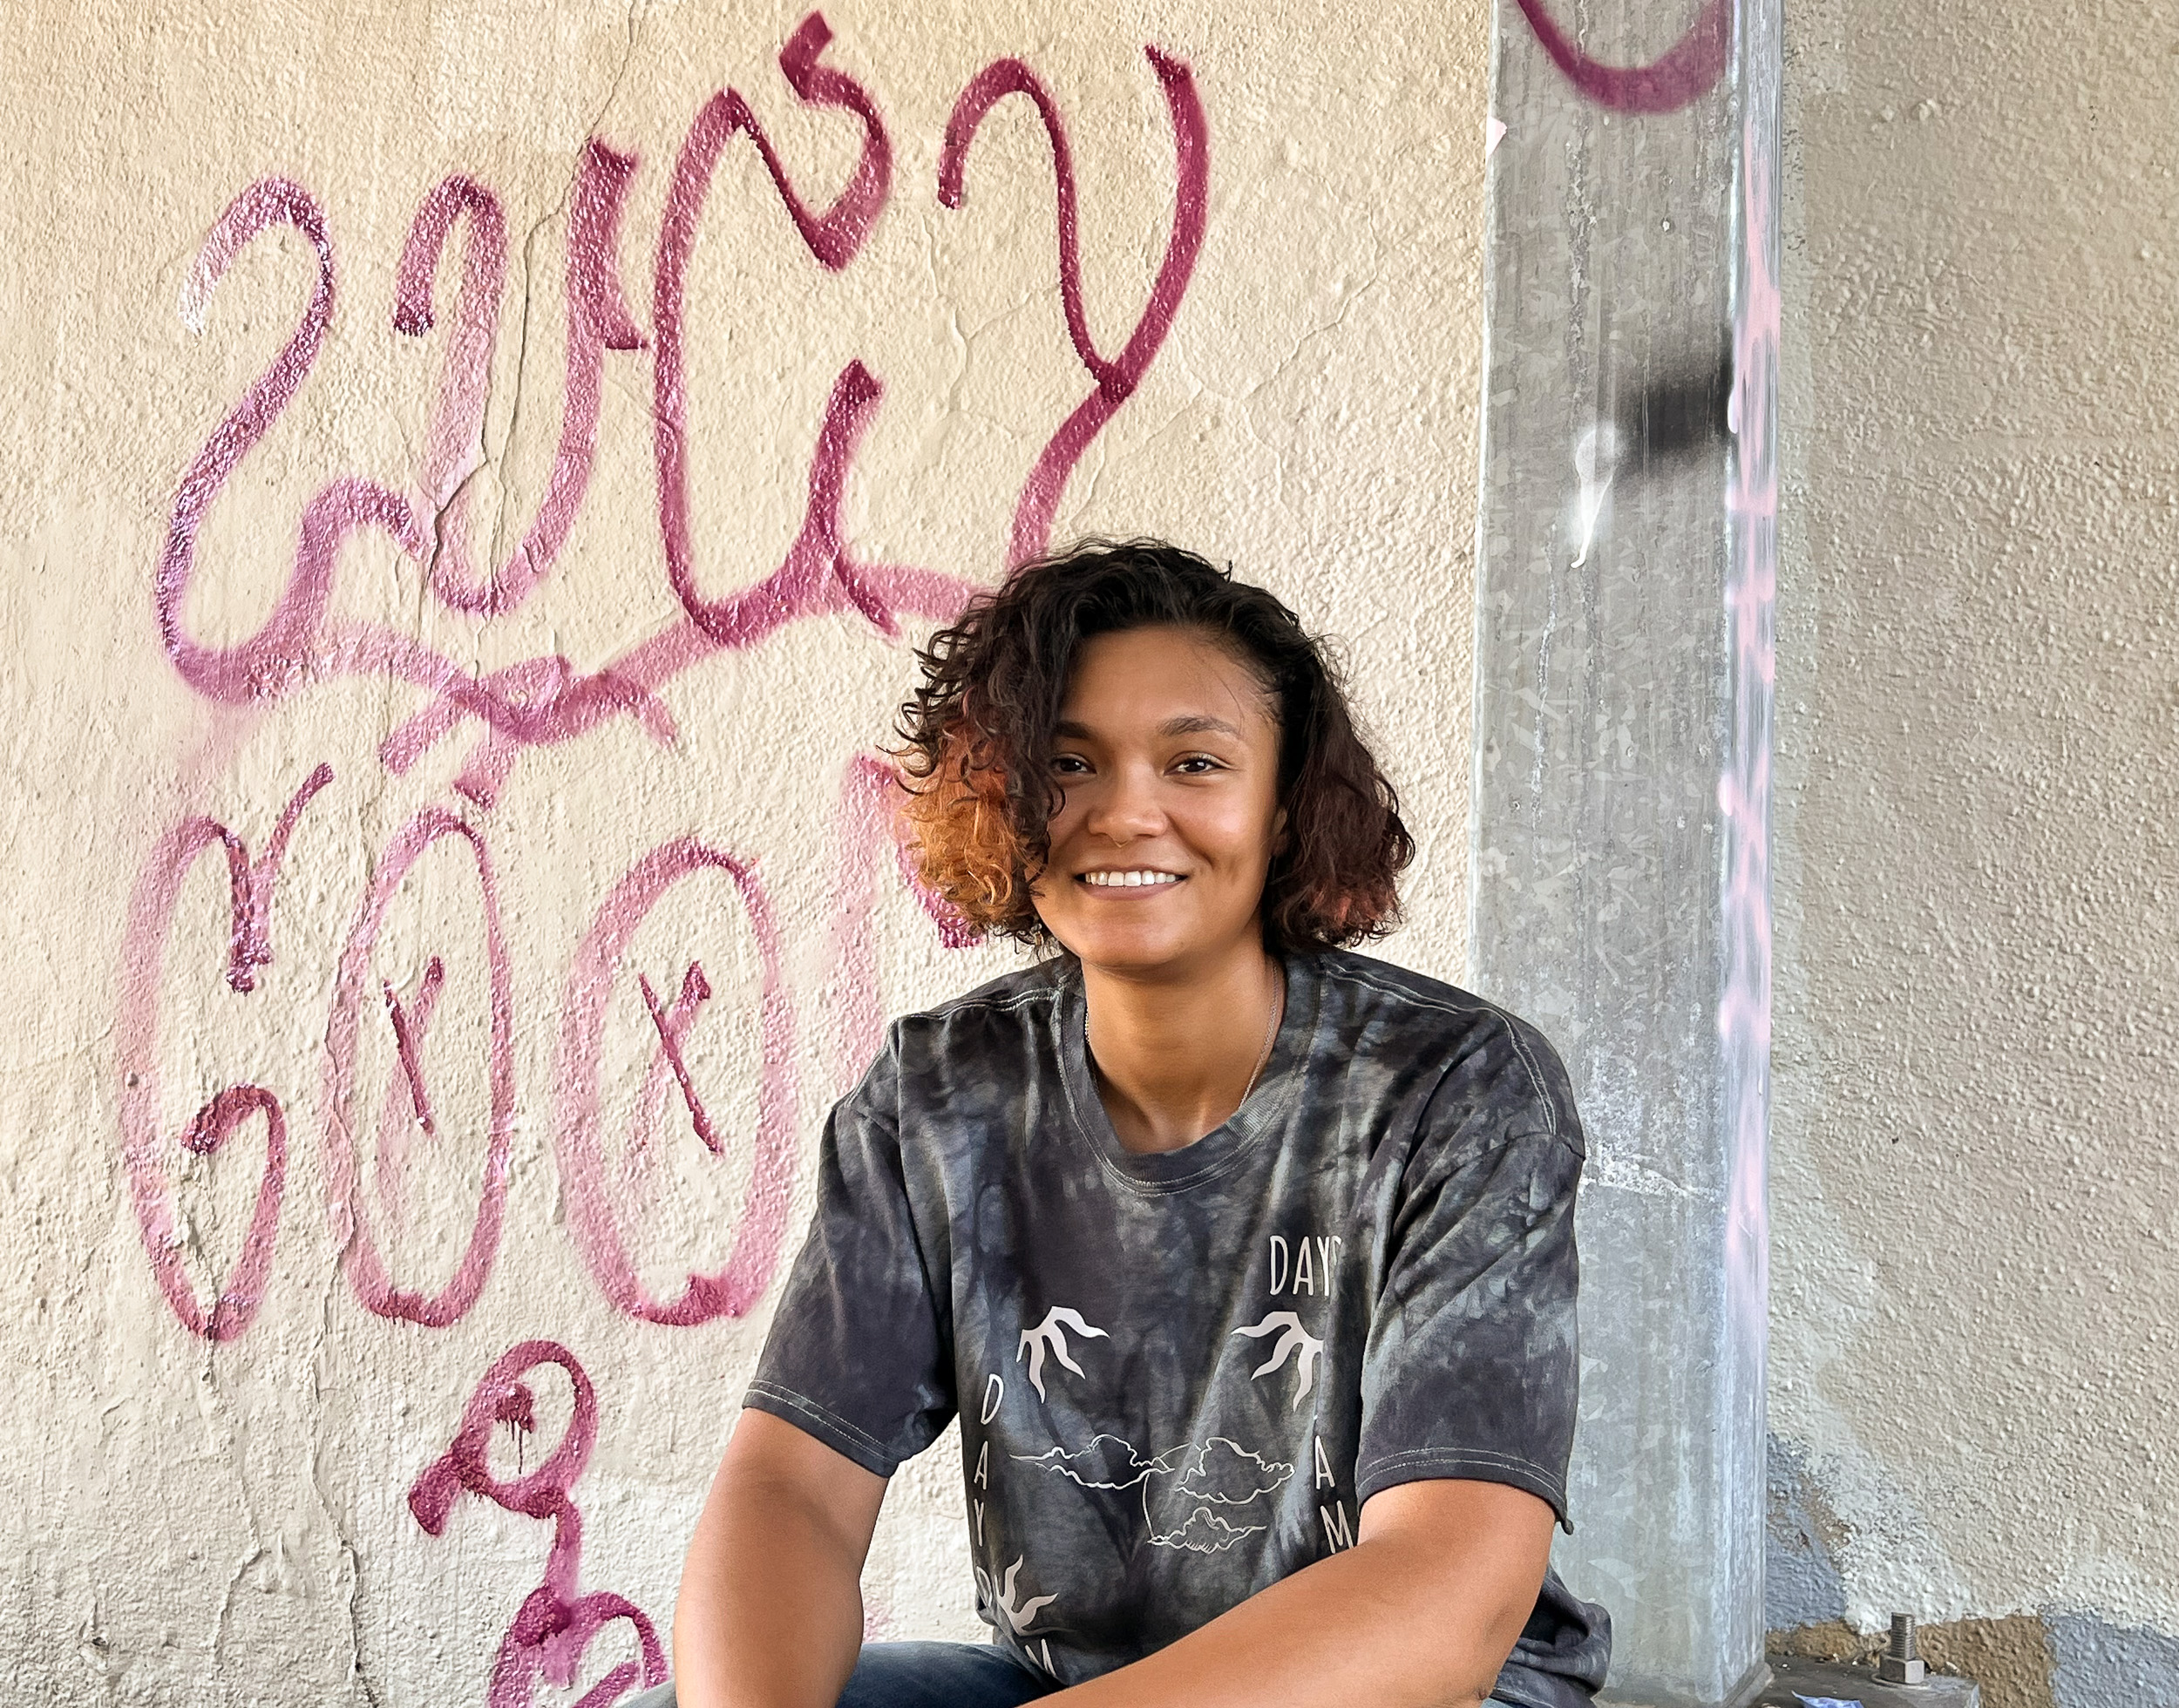 Person smiles while sitting in front of a graffiti wall.